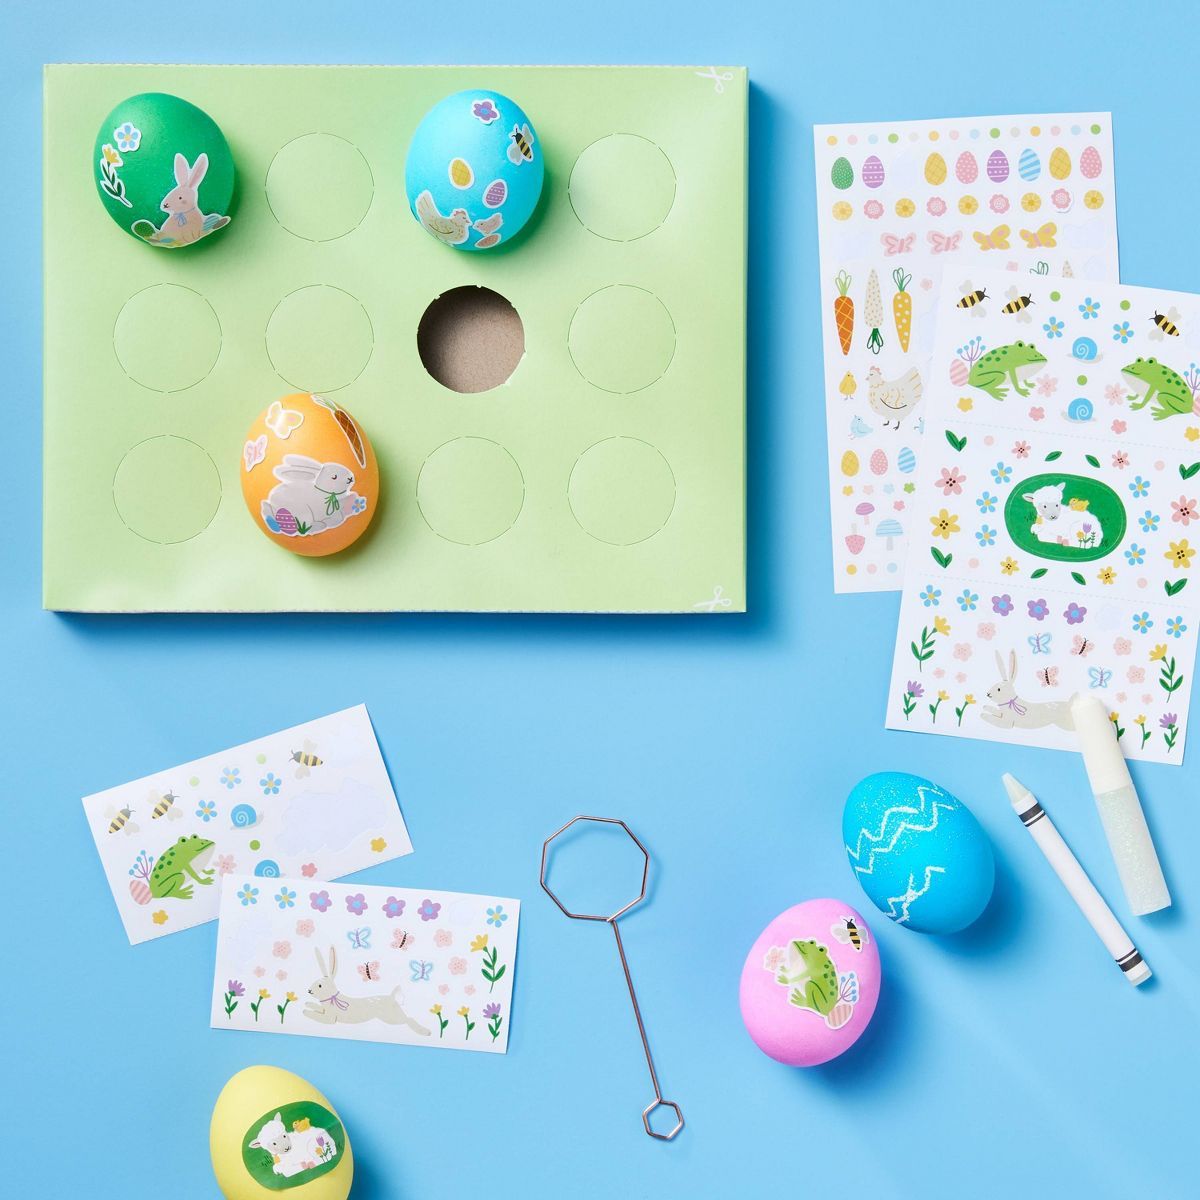 Deluxe Easter Egg Decorating Kit Farmhouse and Friends - Spritz™ | Target